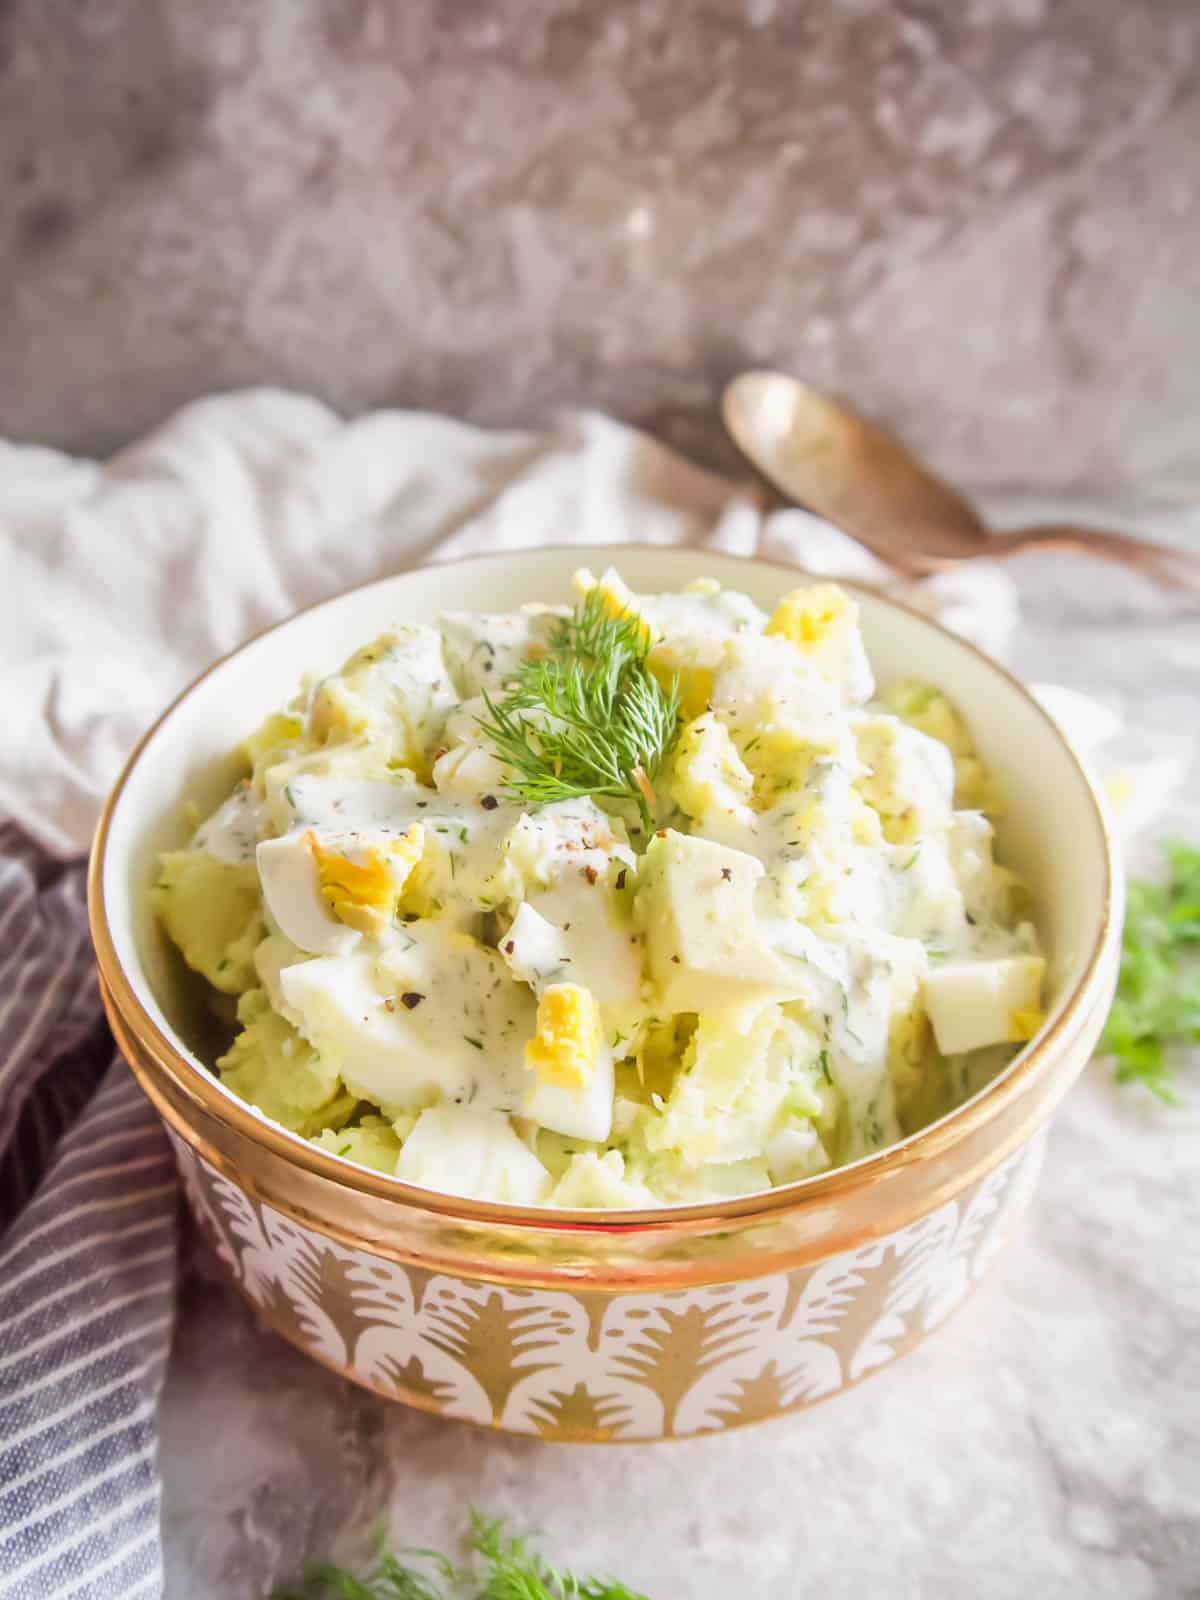 Dill Ranch Potato Salad with Avocado and Eggs (Paleo, Whole30) | Perchance to Cook, www.perchancetocook.com